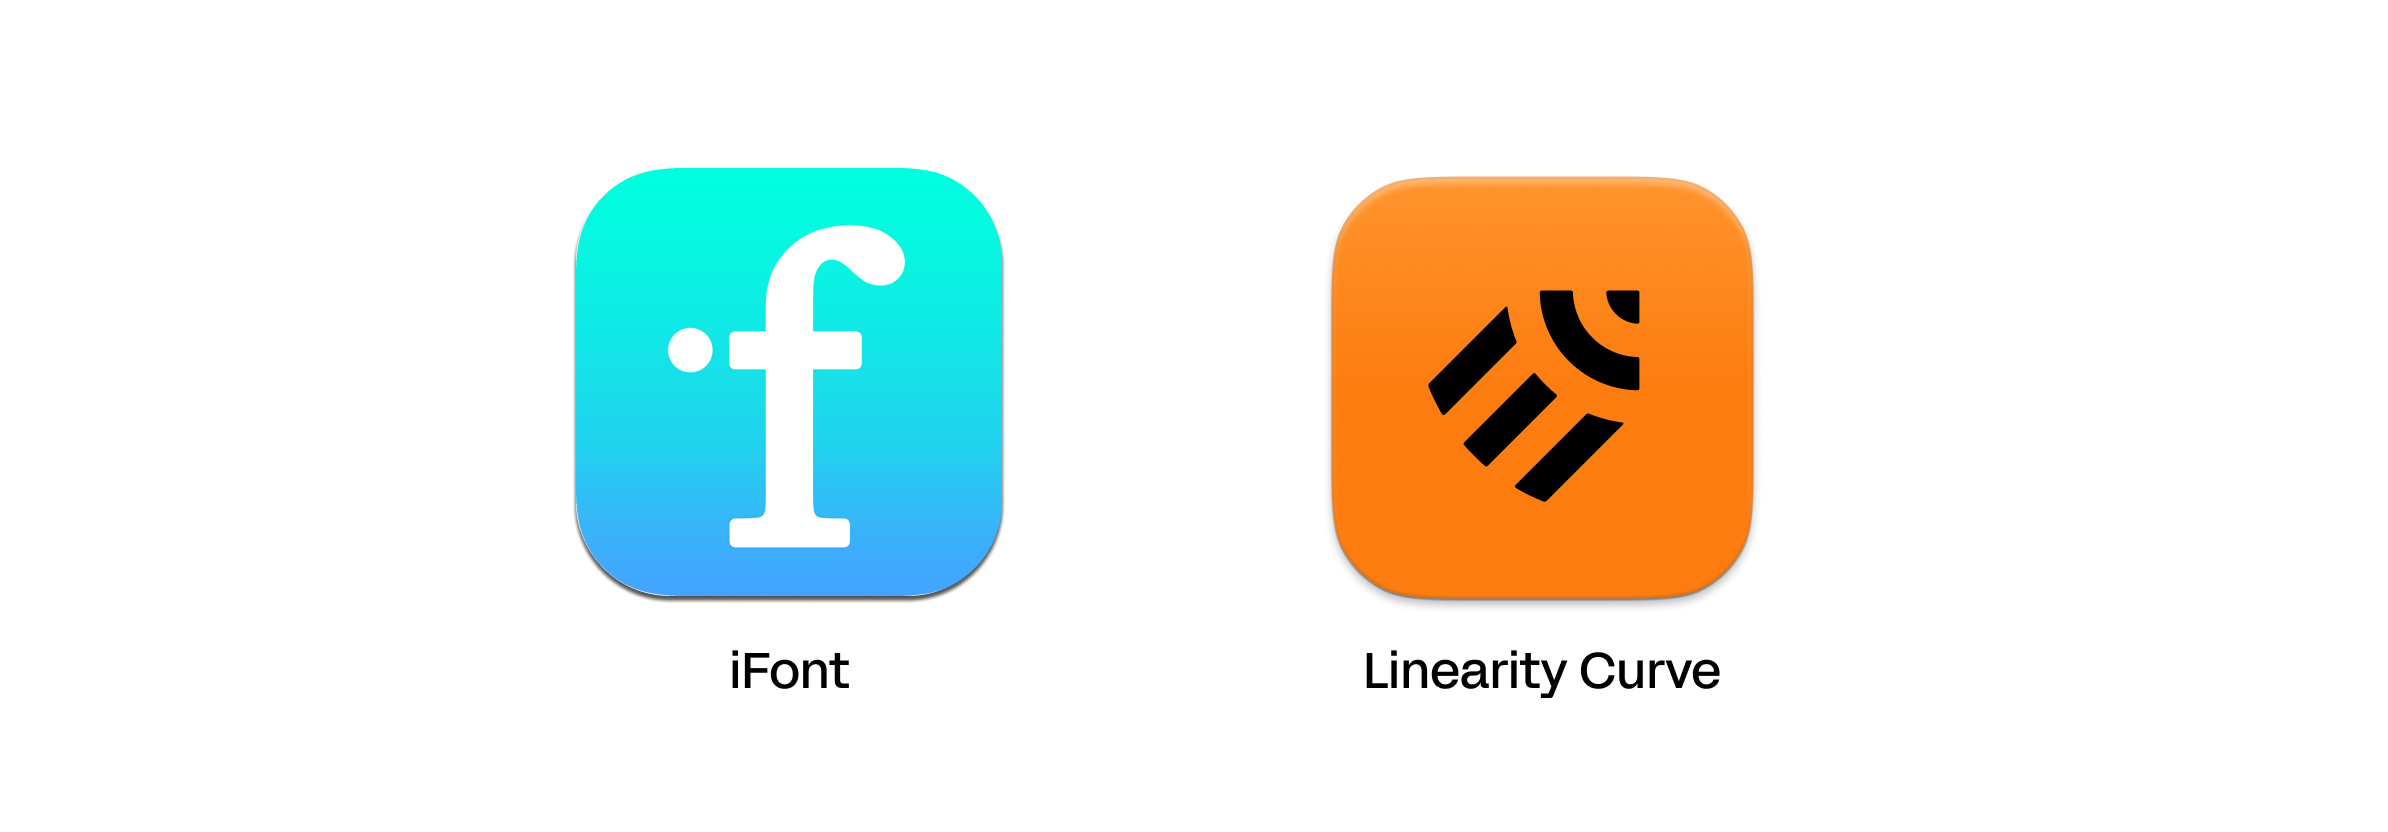 iFont and Linearity Curve logos